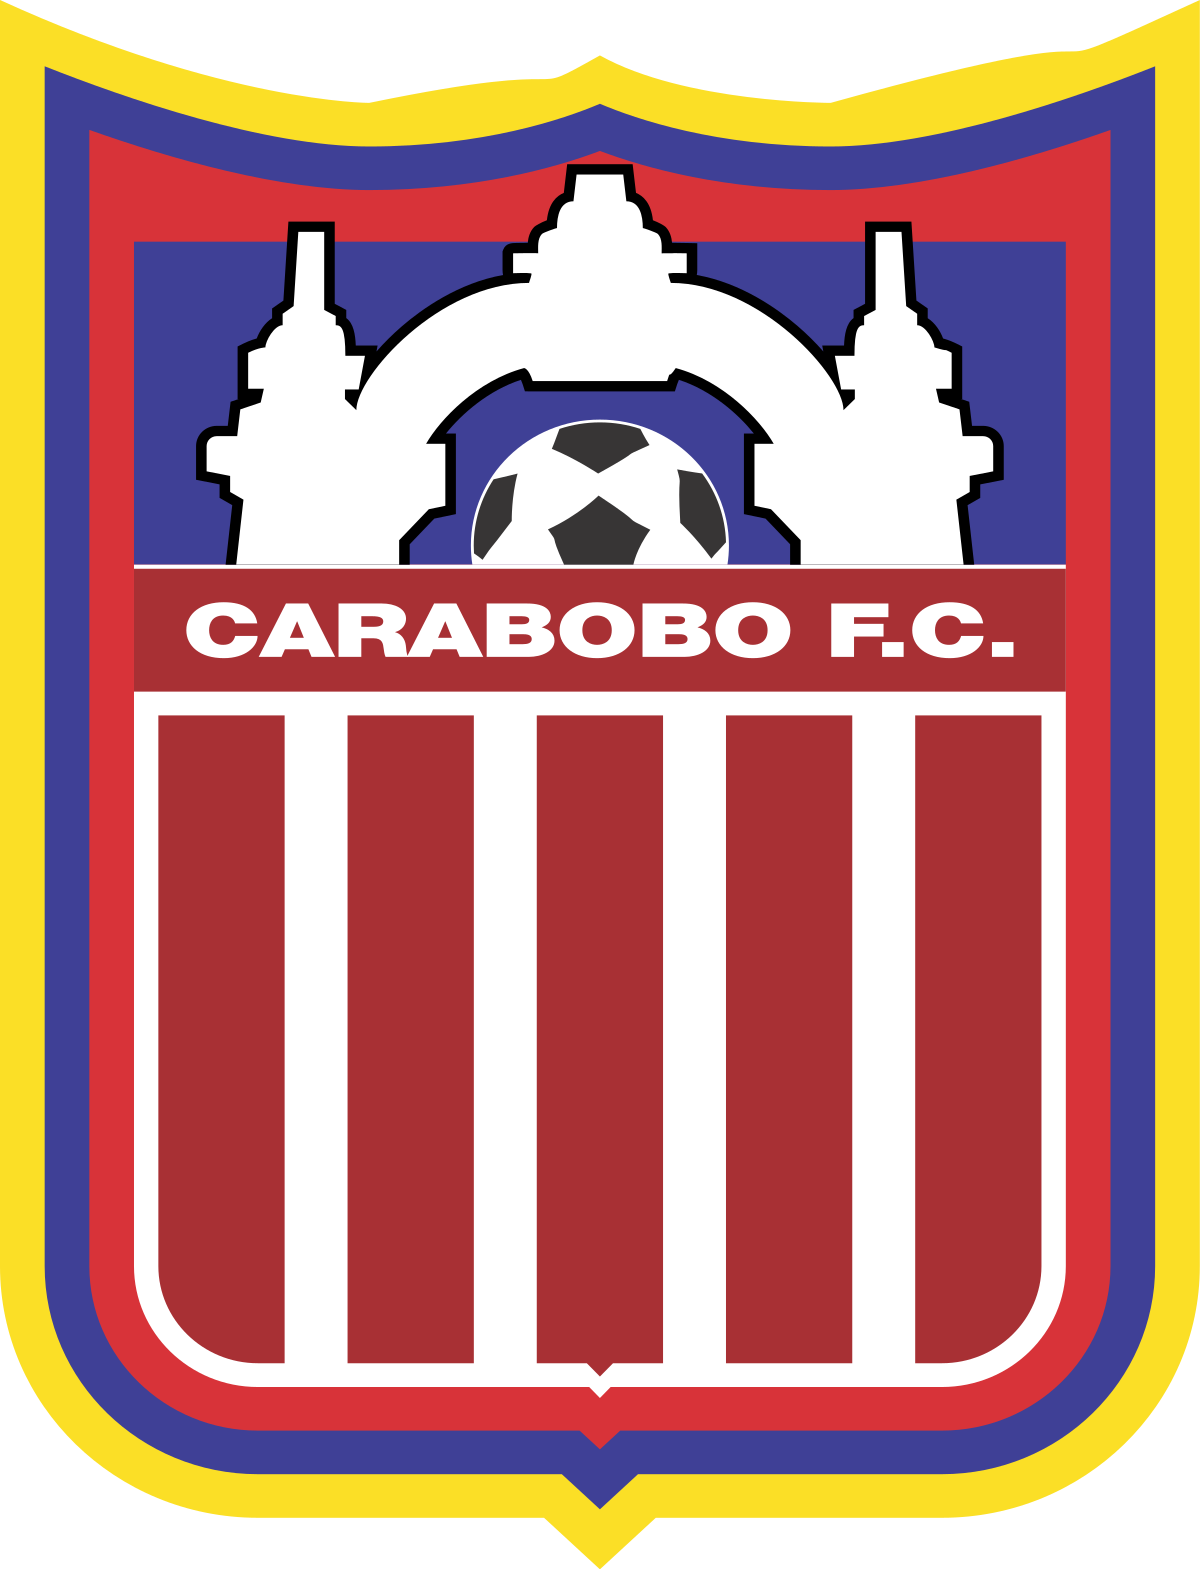 Carabobo vs Puerto Cabello Prediction: I expect a better performance from the home team